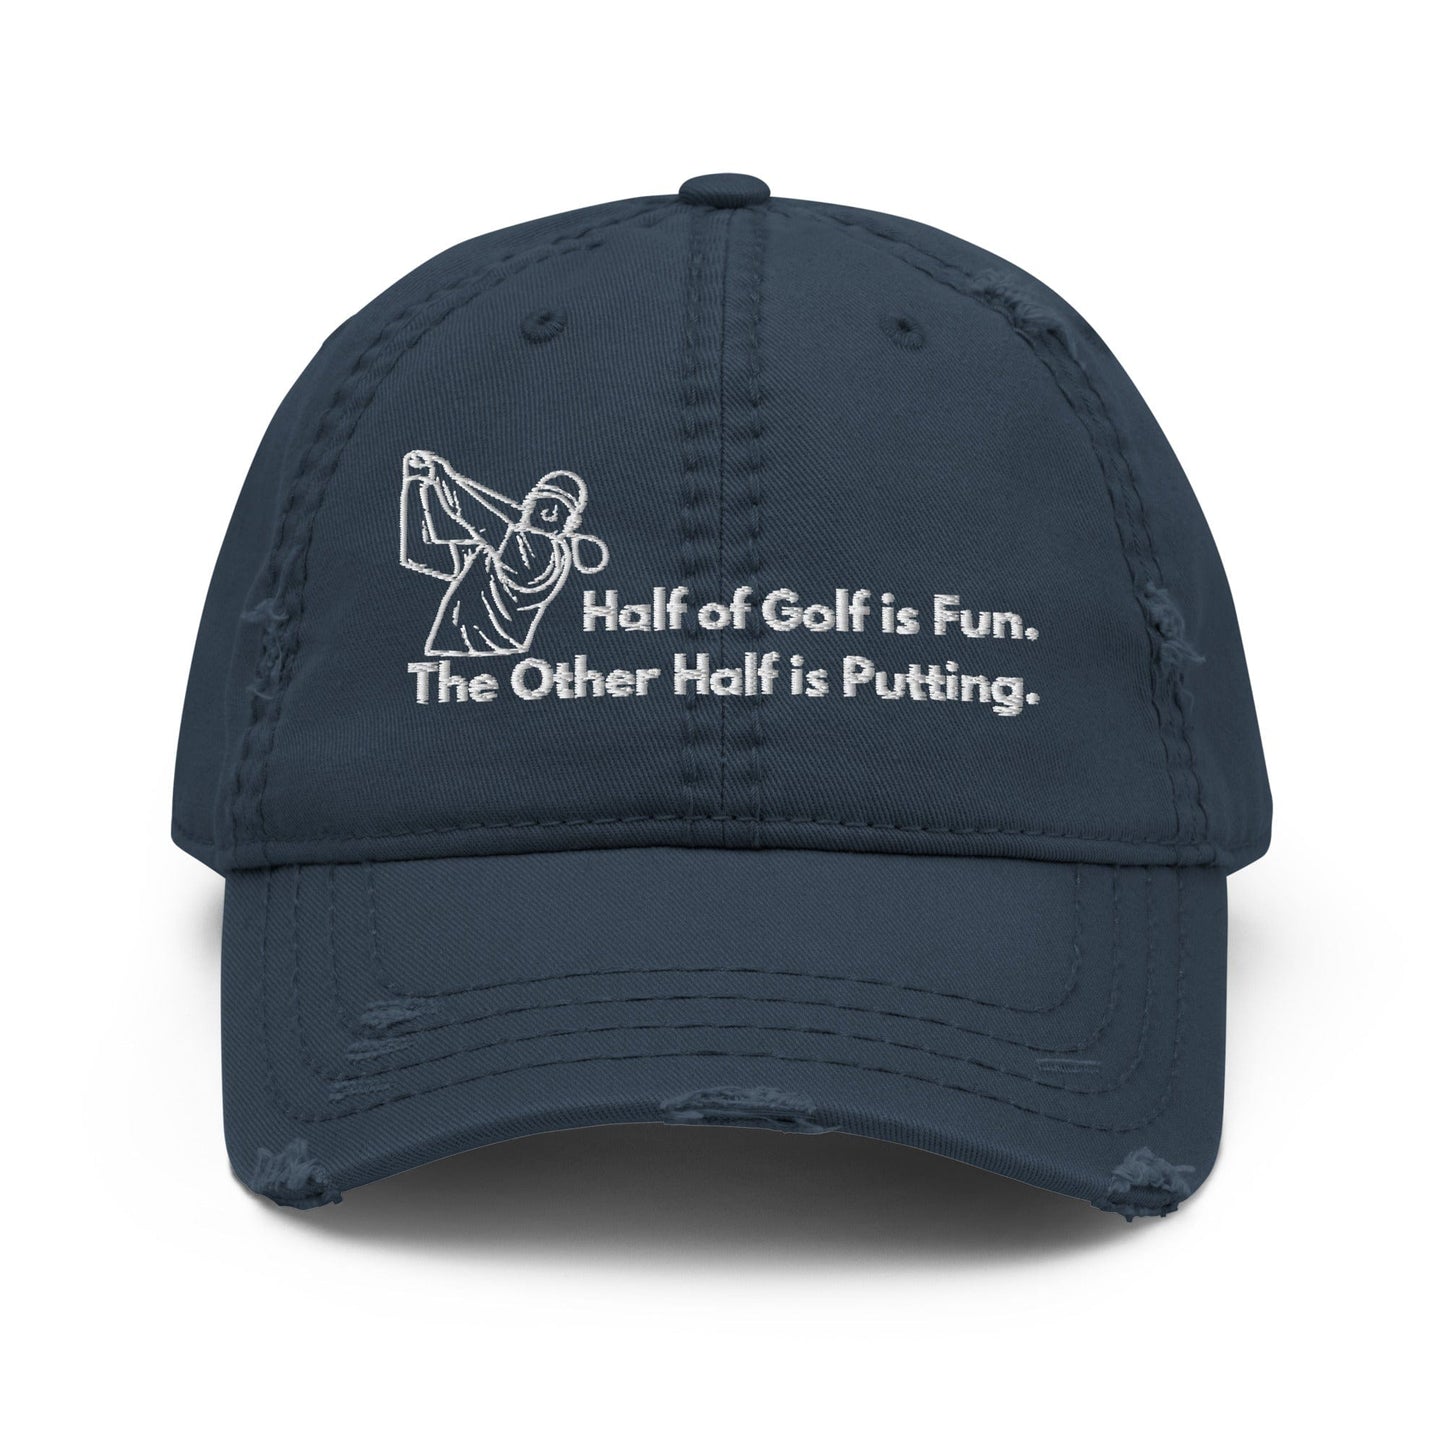 Funny Golfer Gifts  Distressed Cap Navy Half of Golf is Fun Distressed Hat